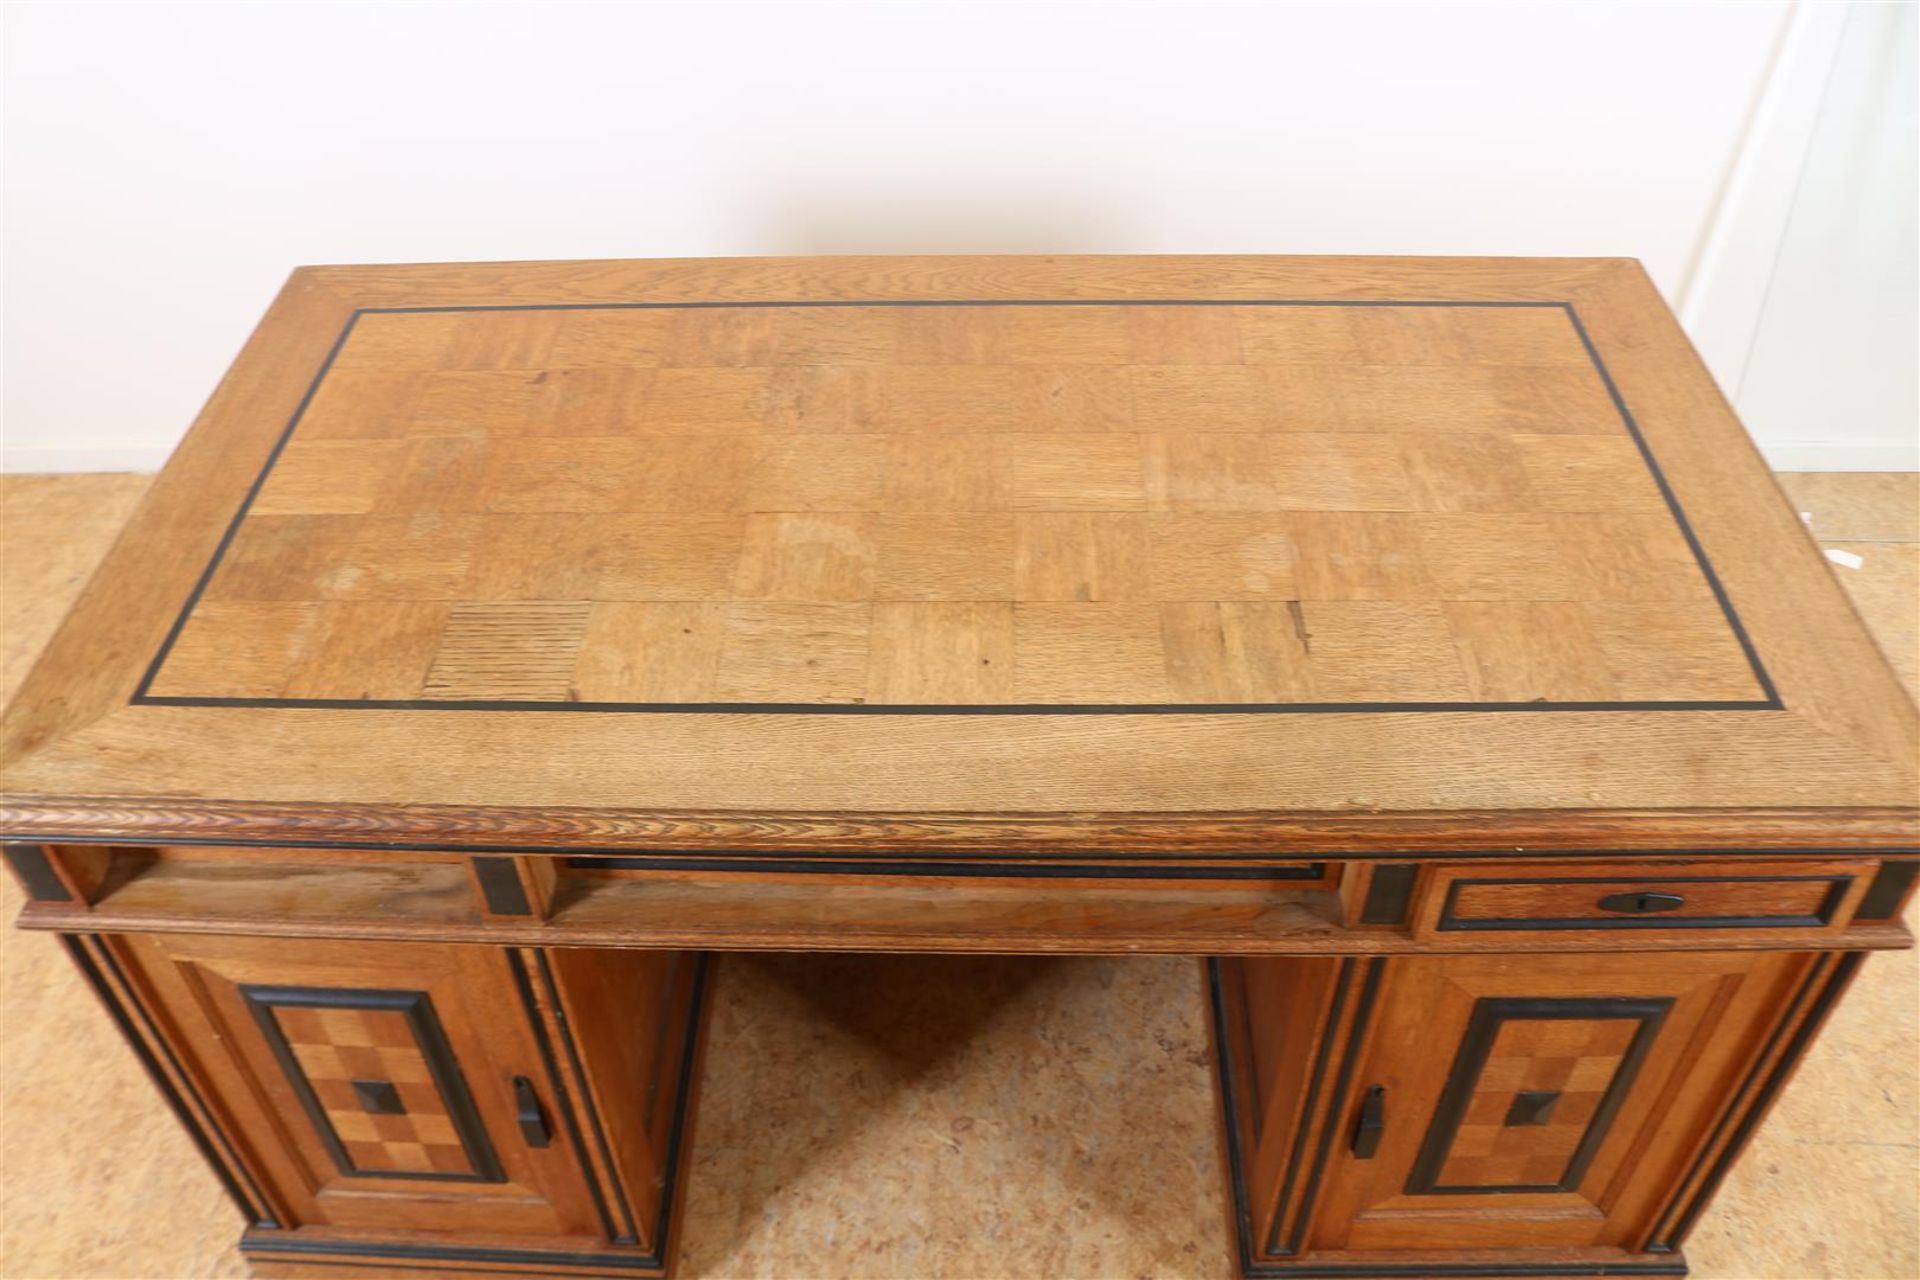 Oak Hague school desk with black inlaid piping in the top, cut glass top, 3 drawers and 2 panel - Image 4 of 9